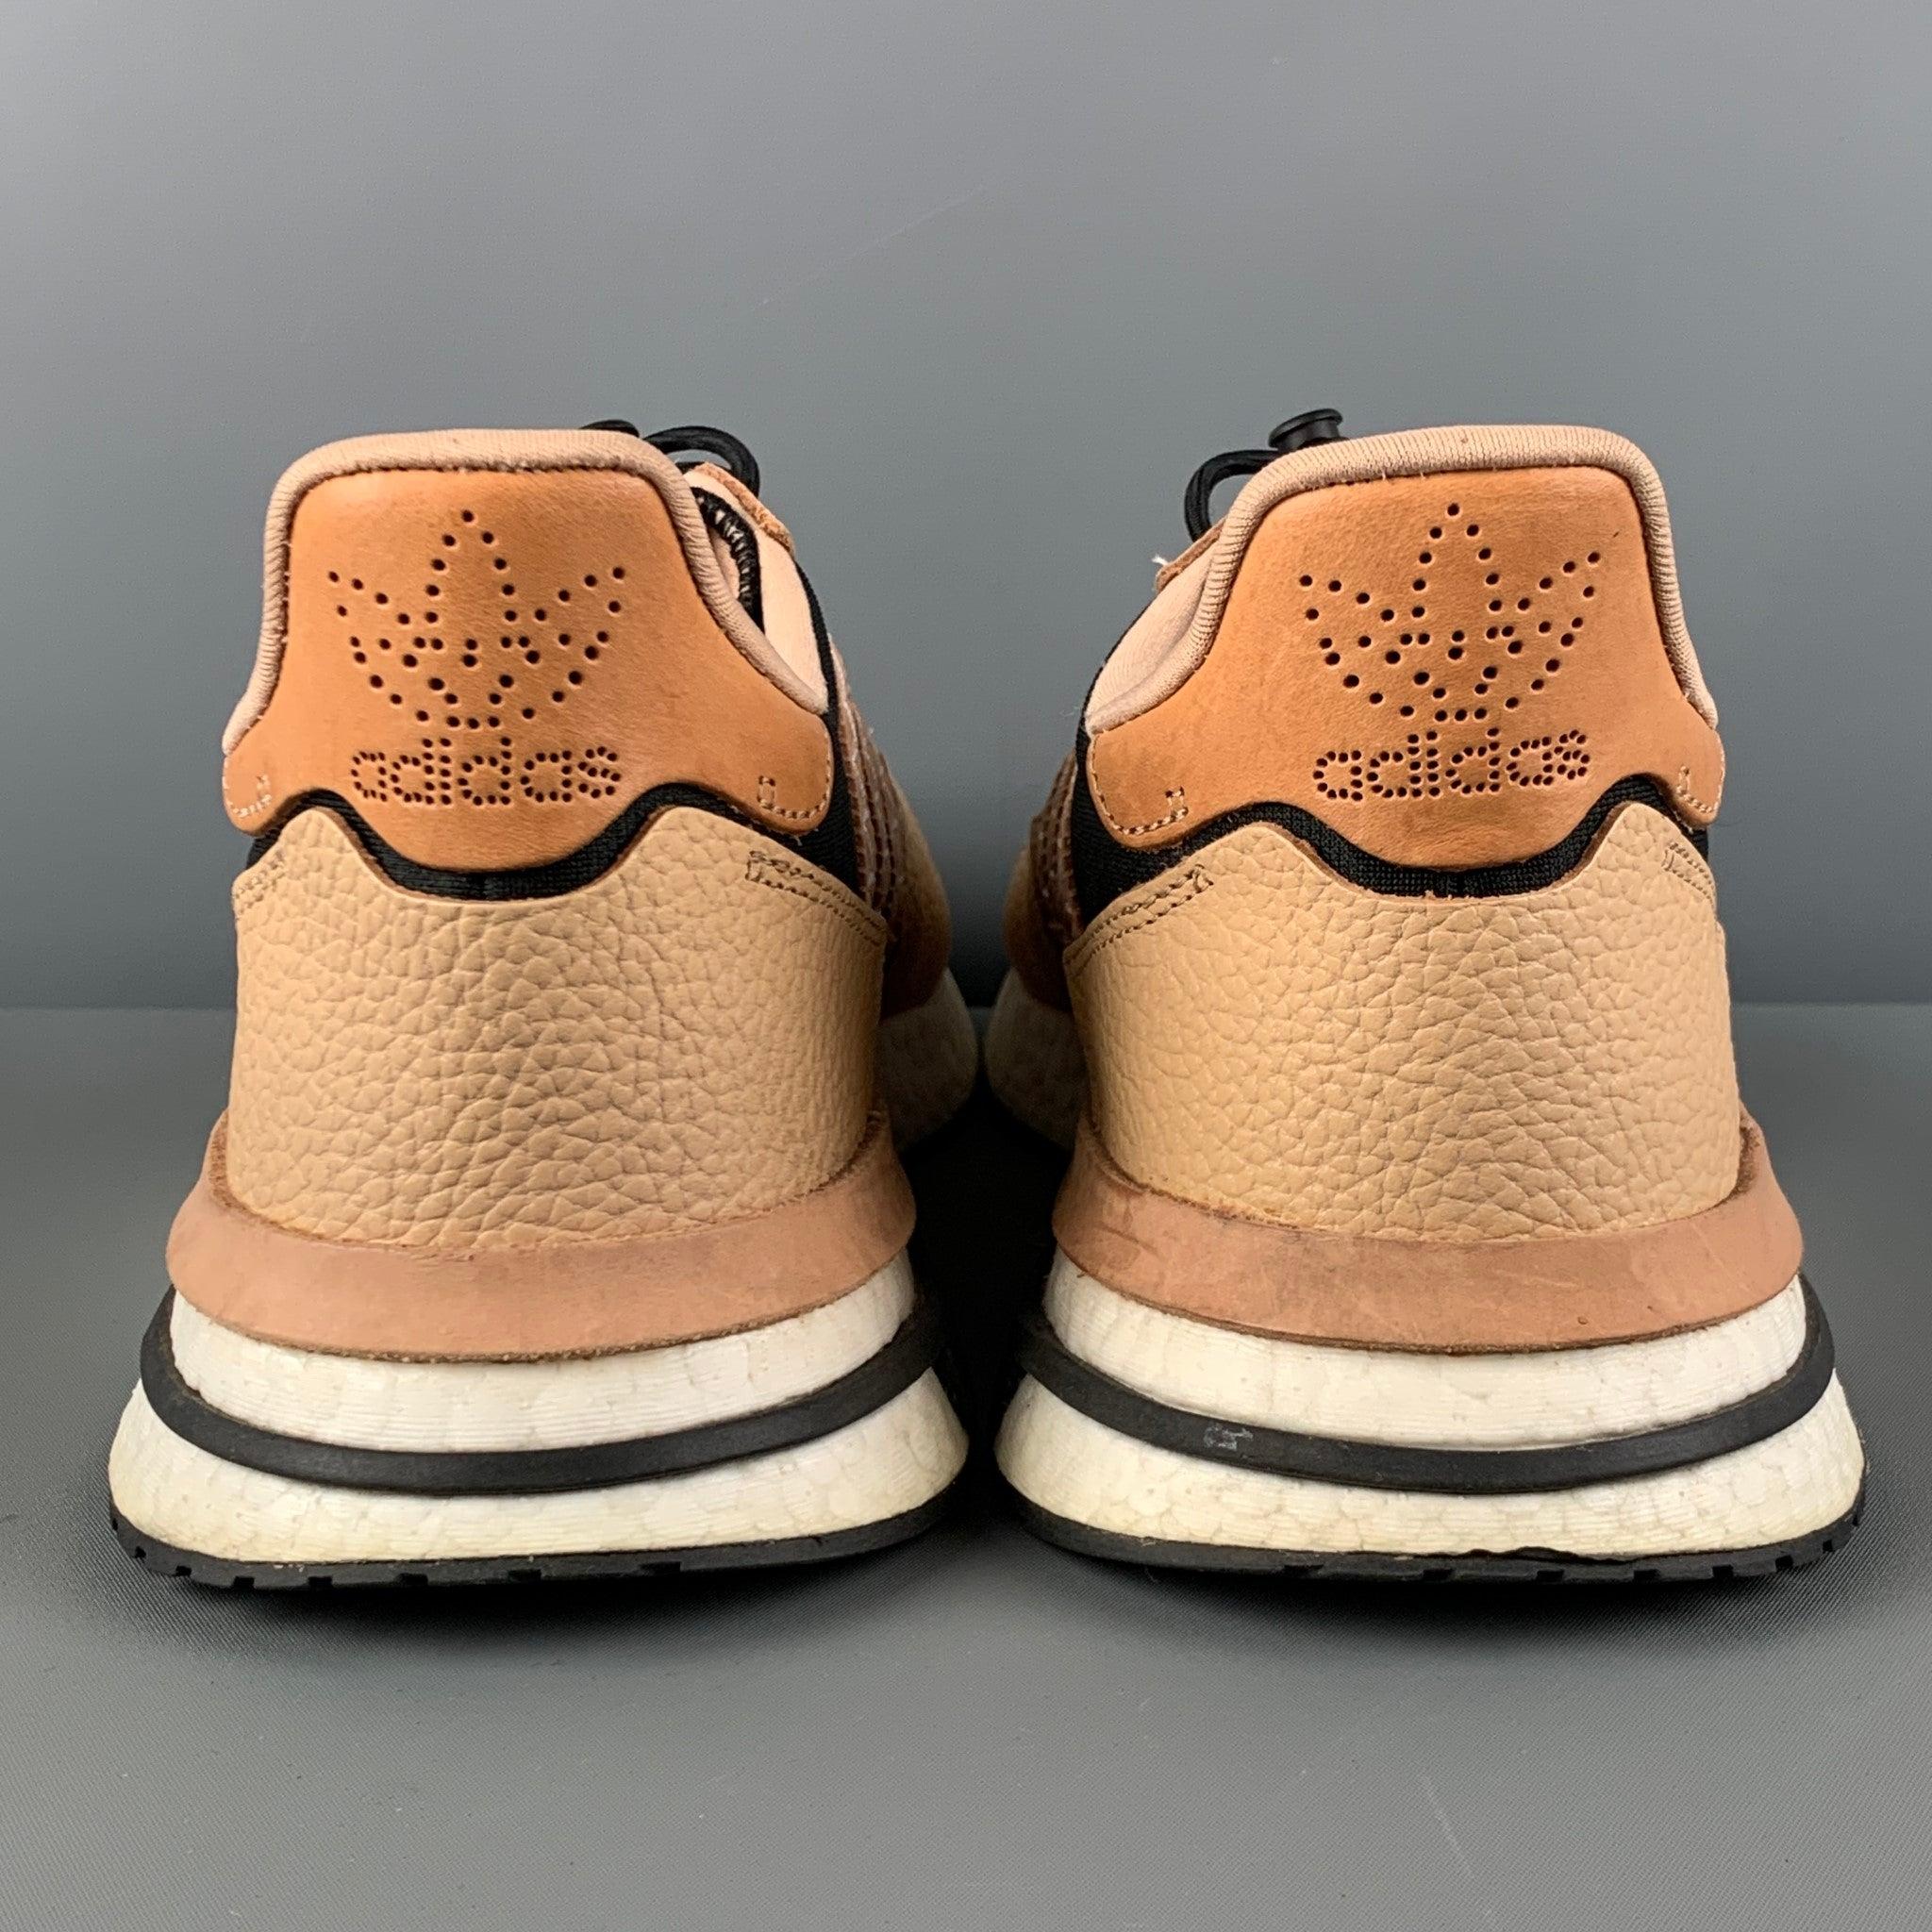 ADIDAS x HENDER SCHEME Size 10.5 Tan Black Leather Lace Up Sneakers For Sale 1